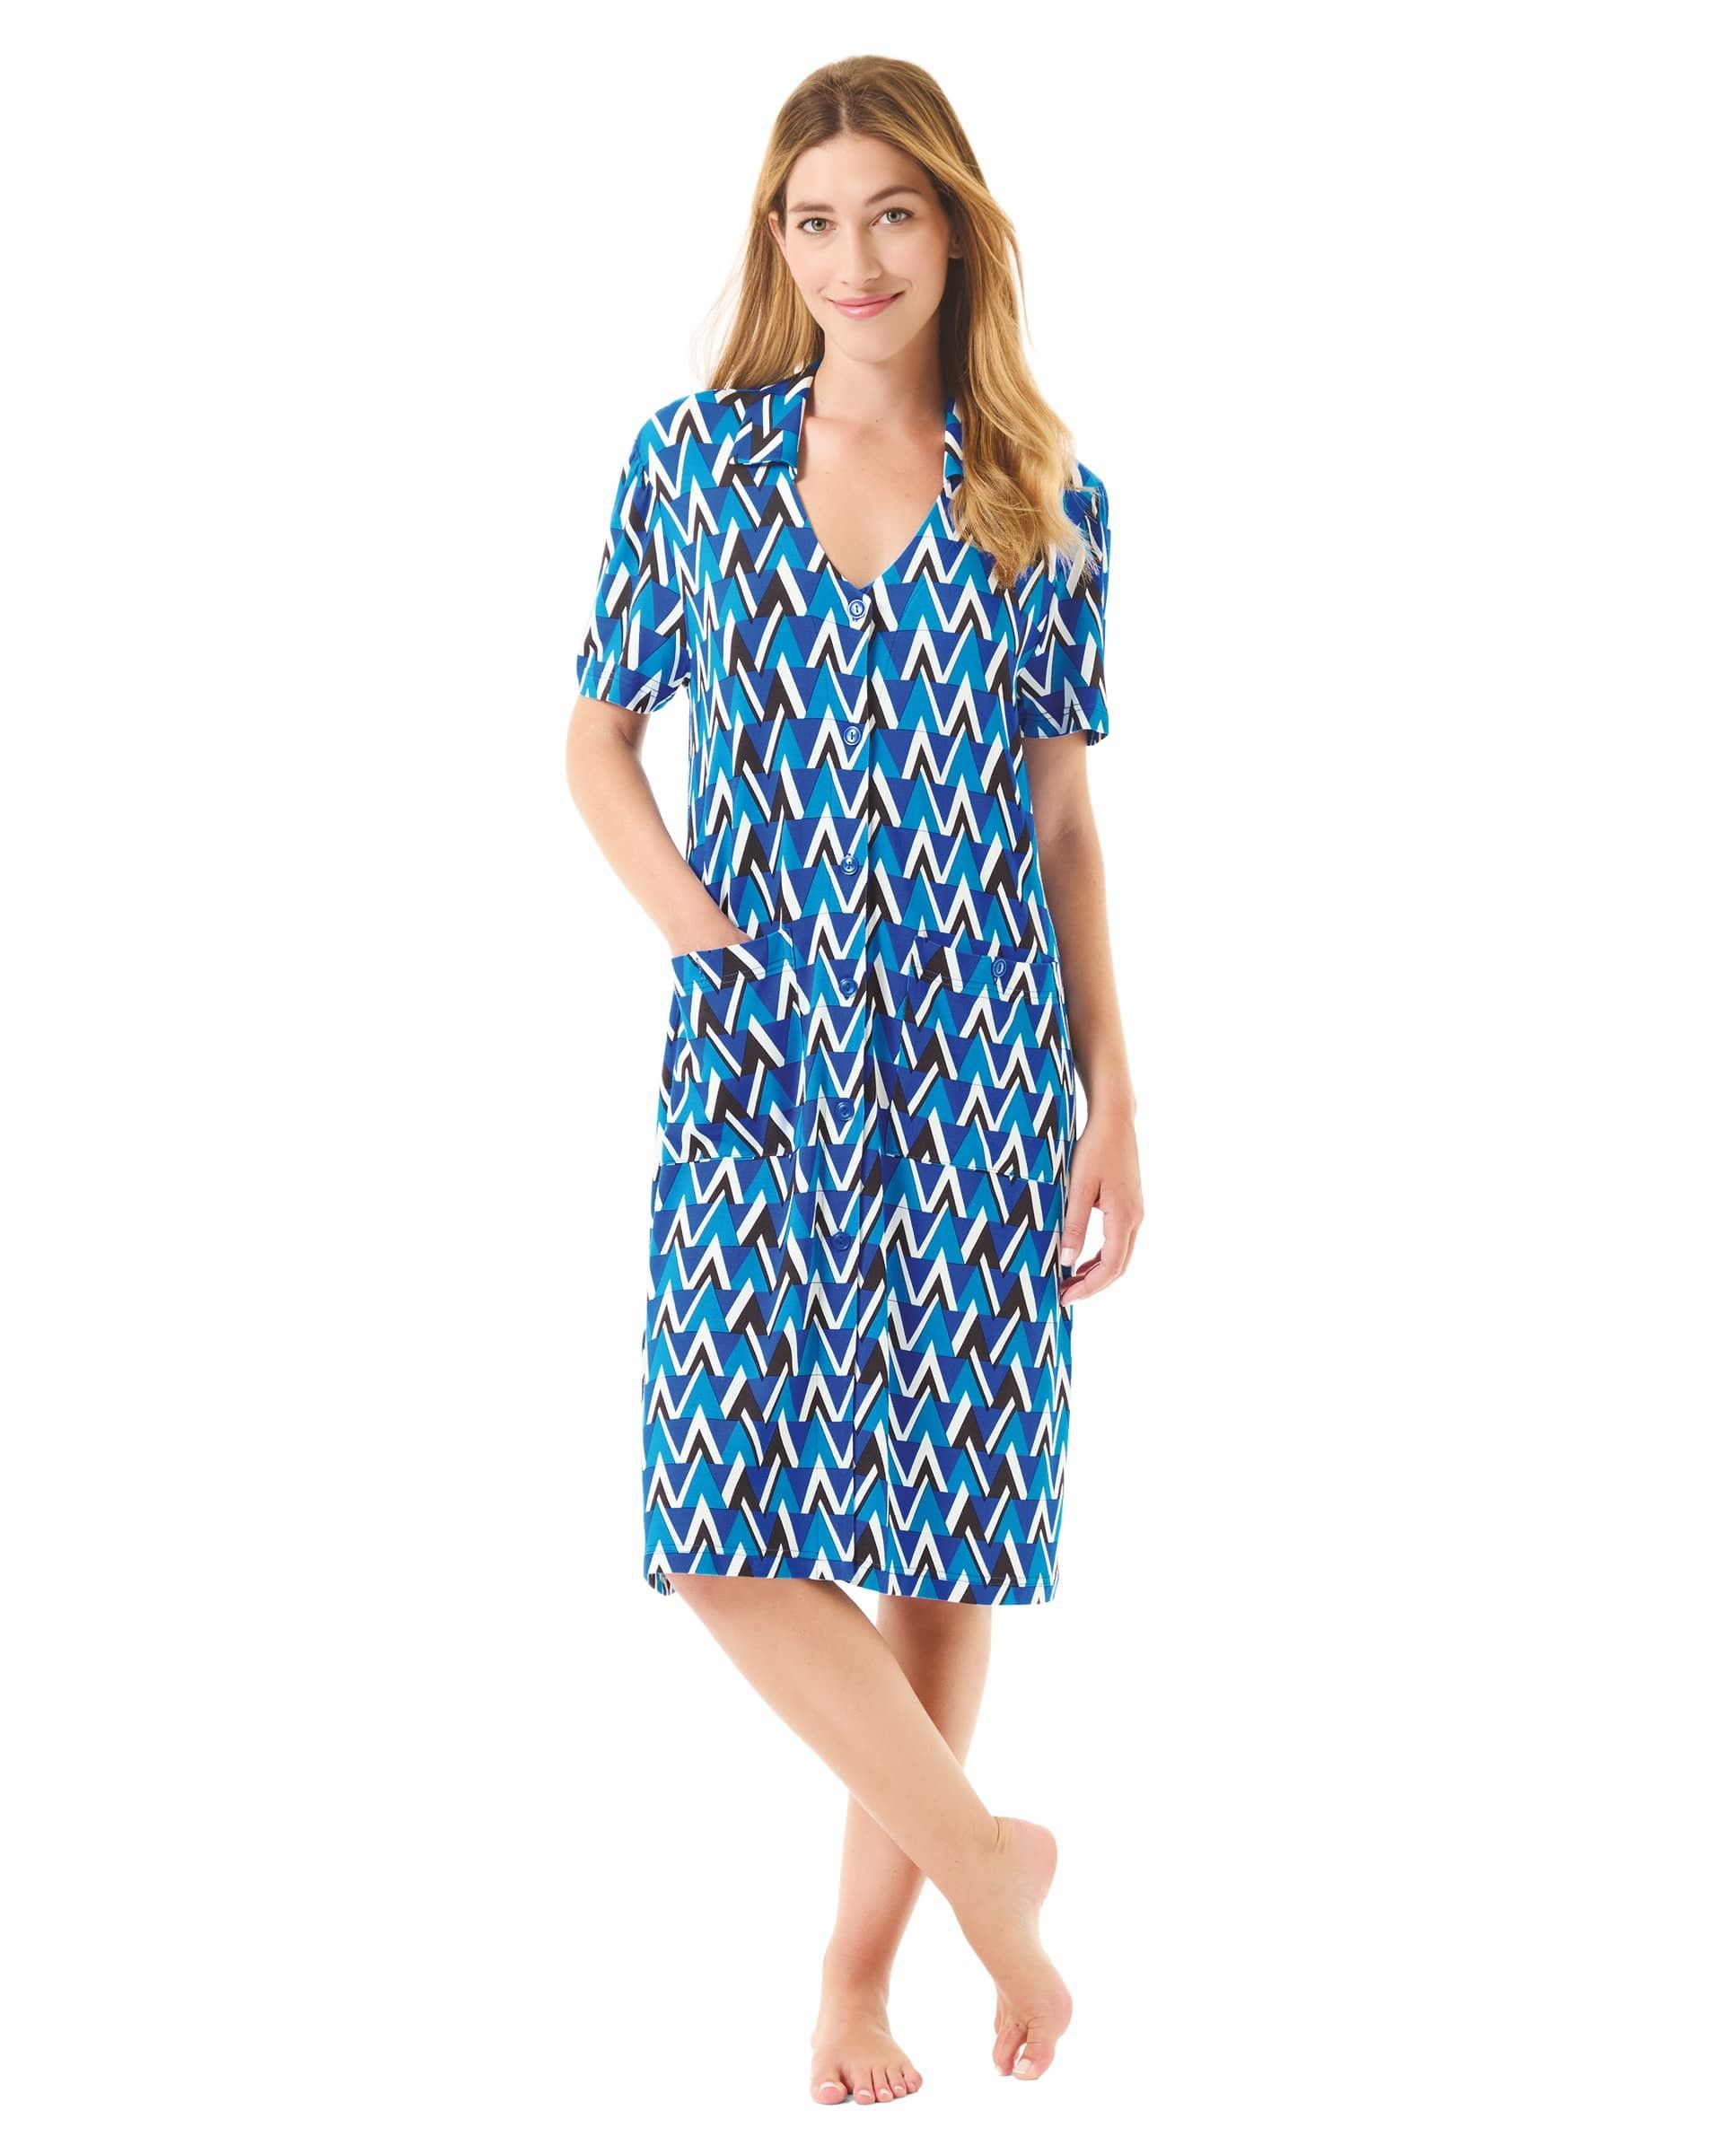 Woman wearing short summer dress with open short sleeves with buttons, geometric print